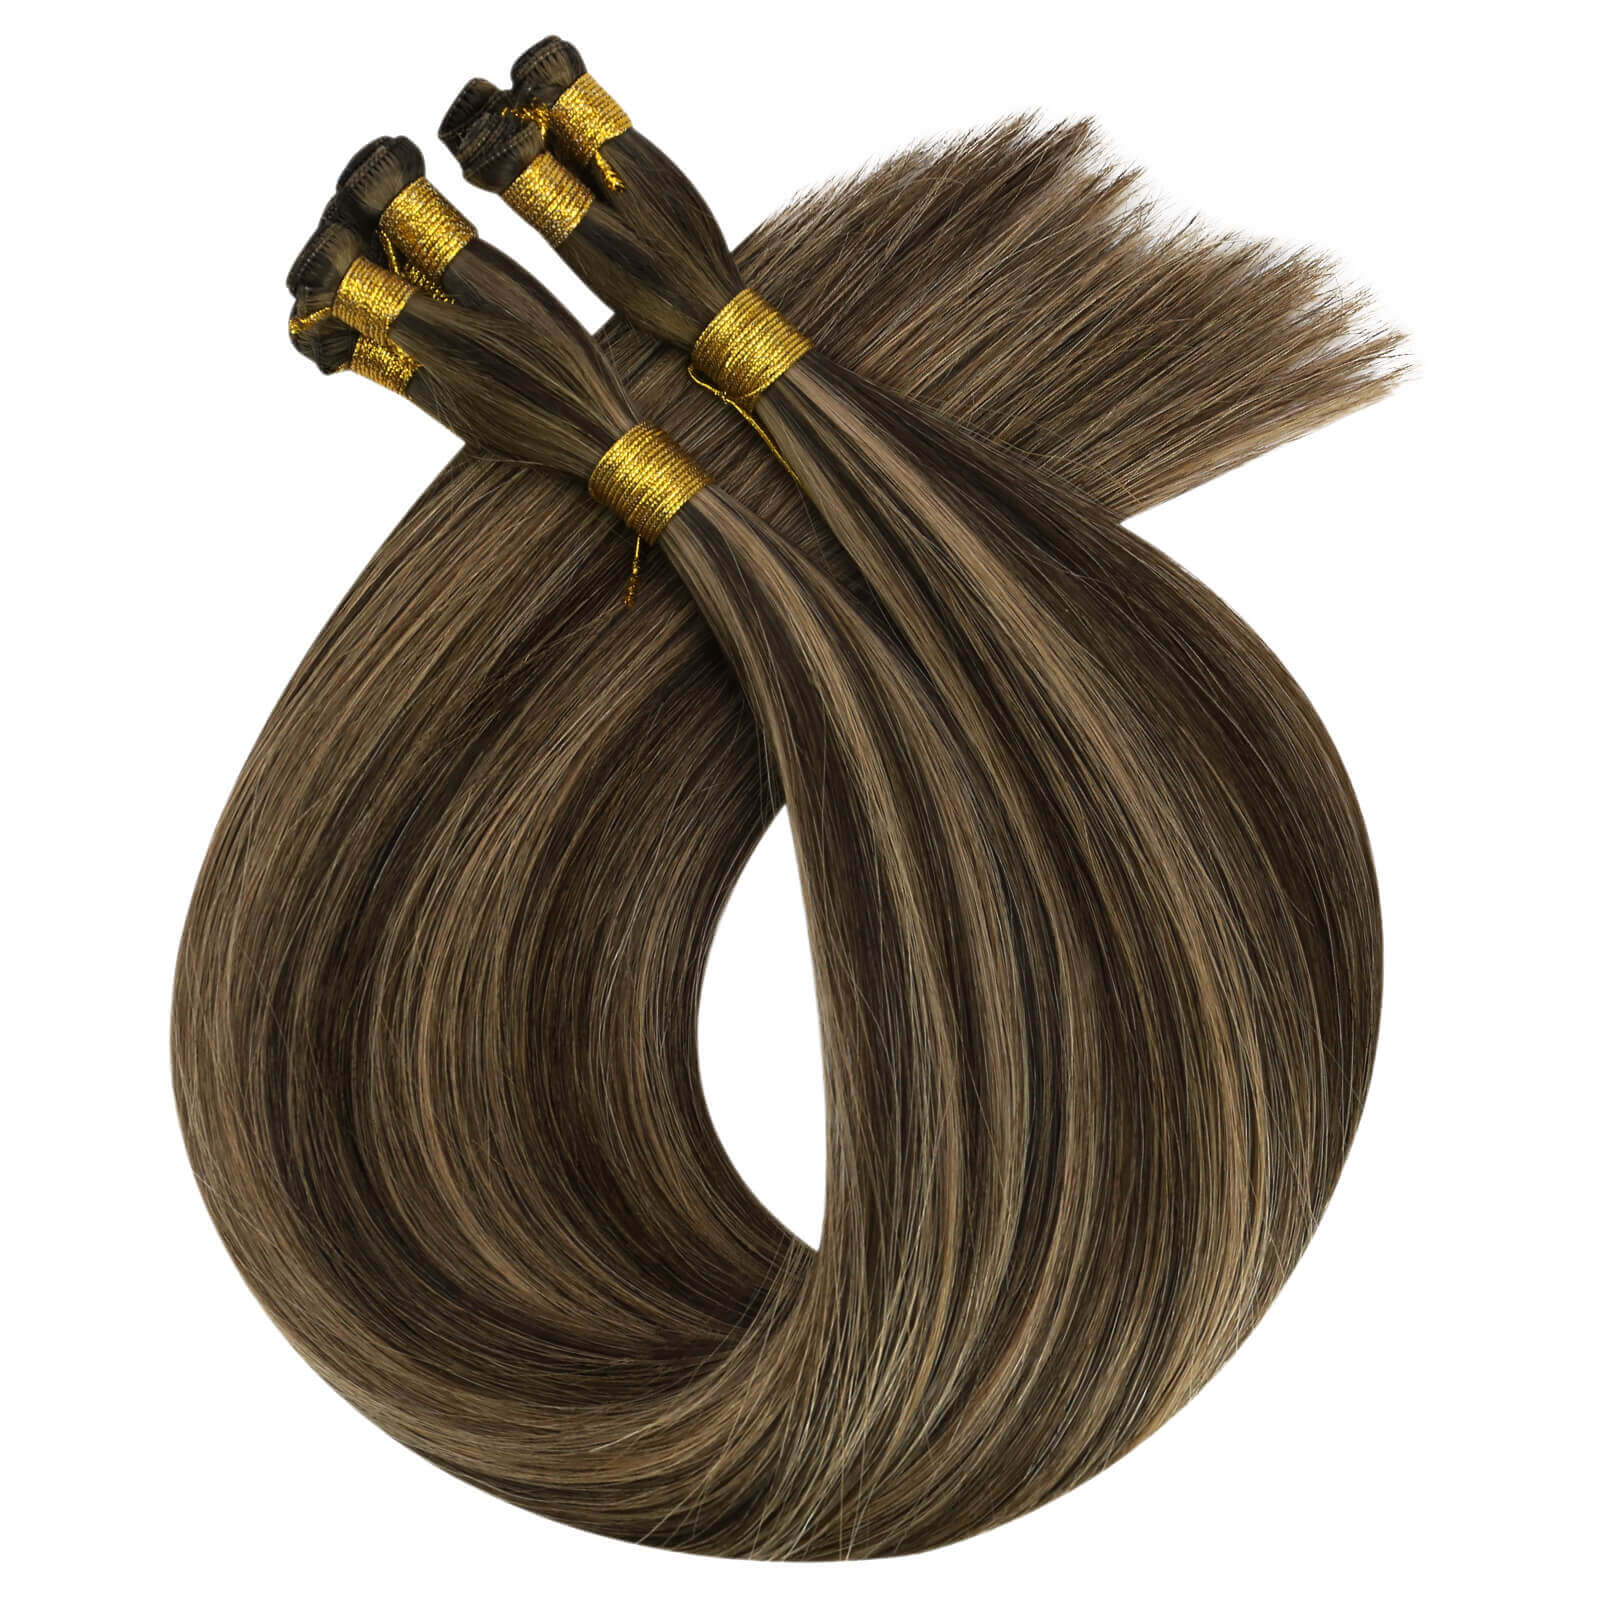 hand-tied hair extensions,human hair extensions,moresoo hair extensions,human hai extensions